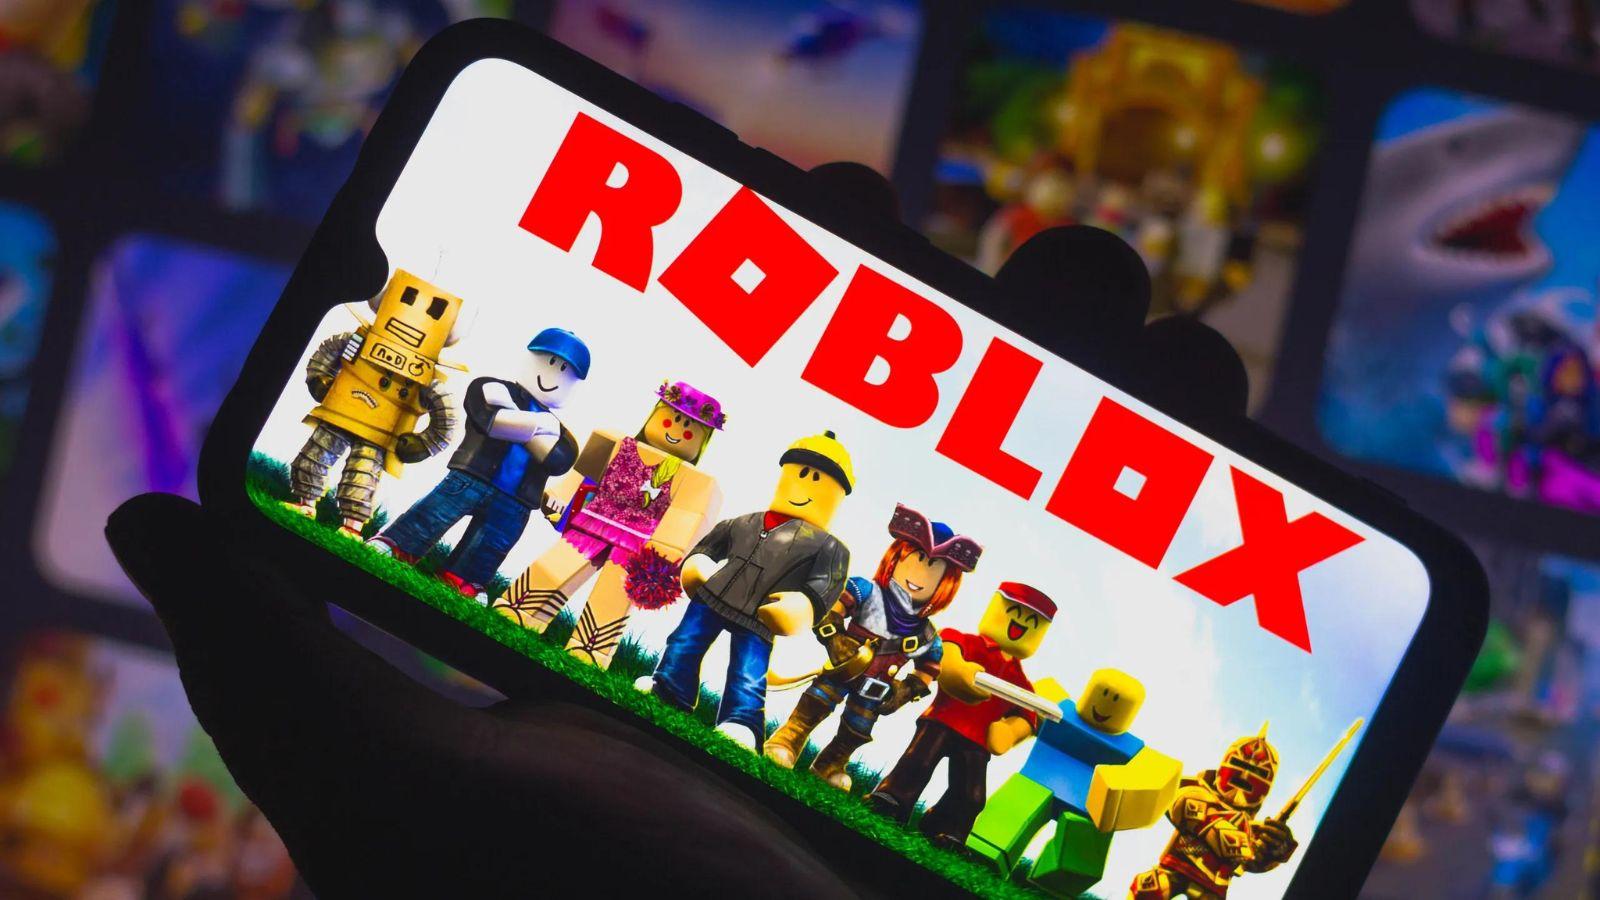 Roblox on a mobile phone